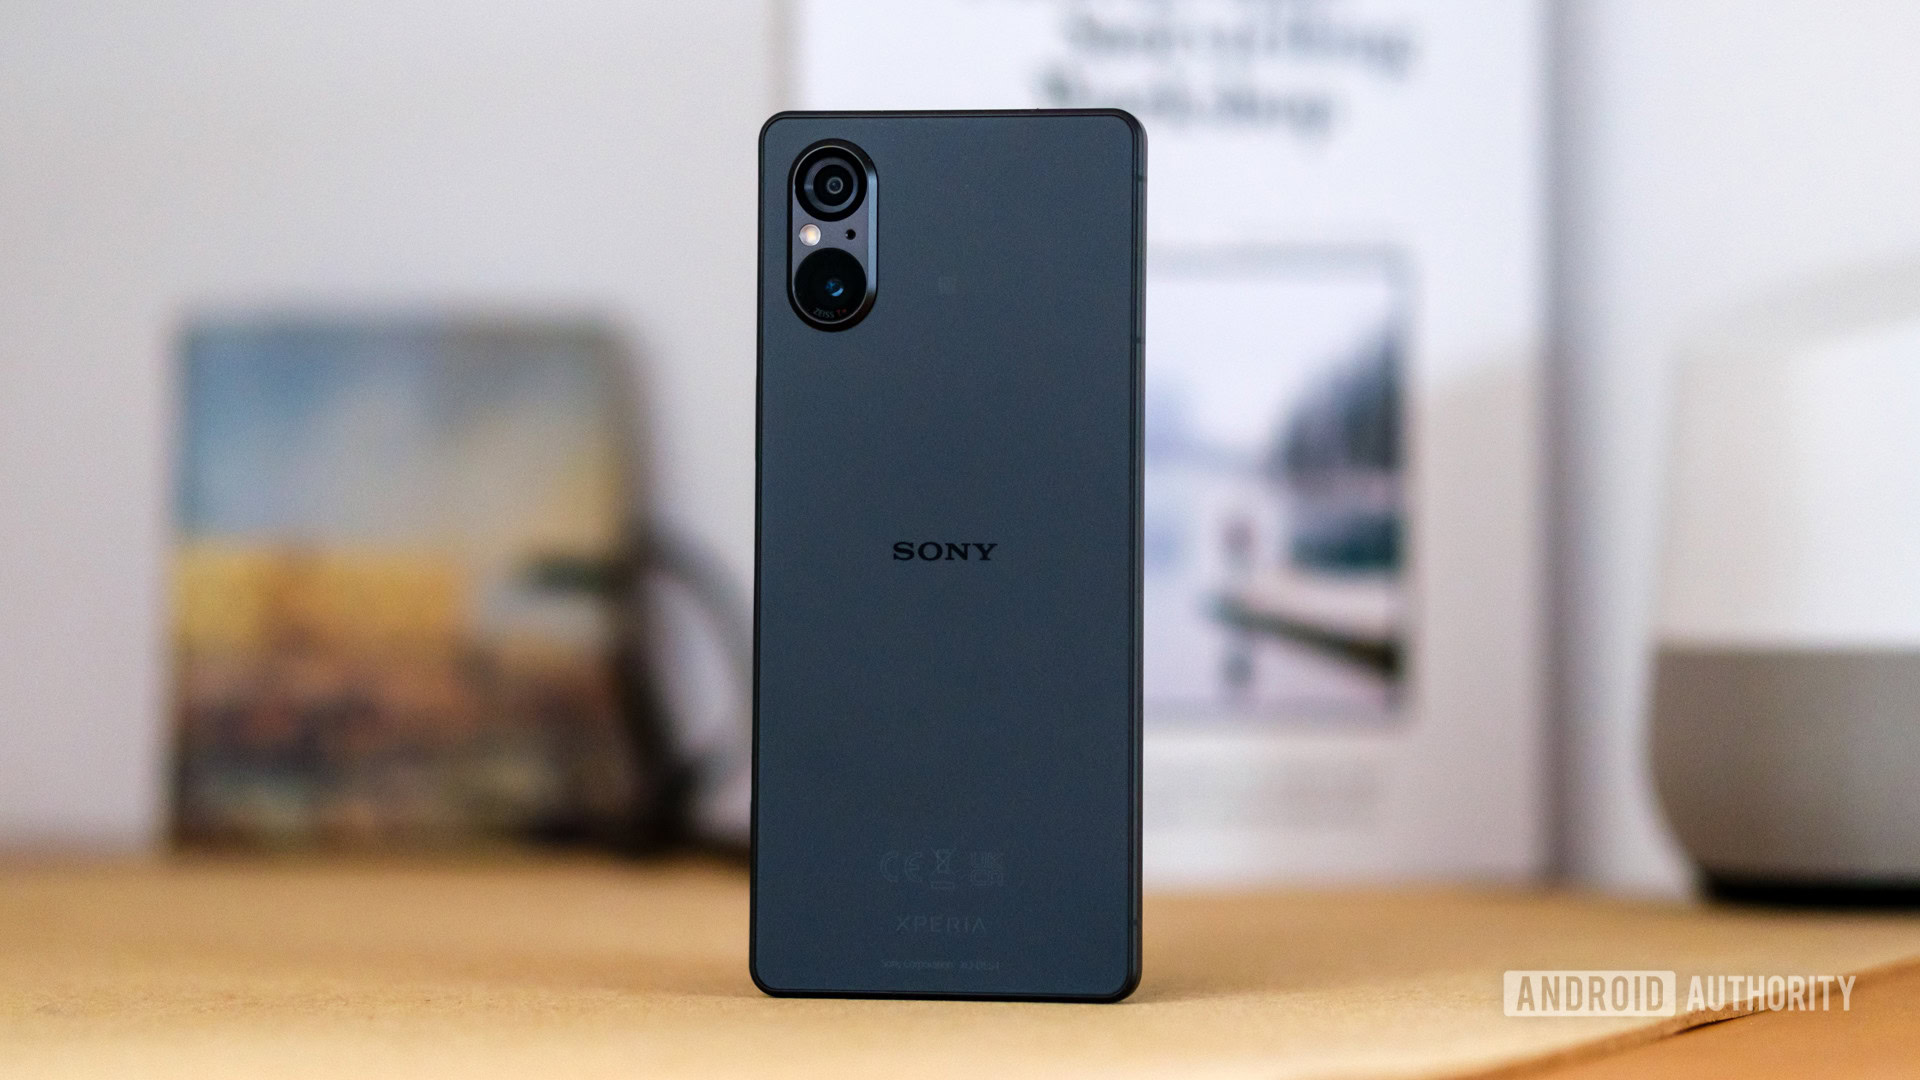 Sony Xperia 5 V review: Software, performance